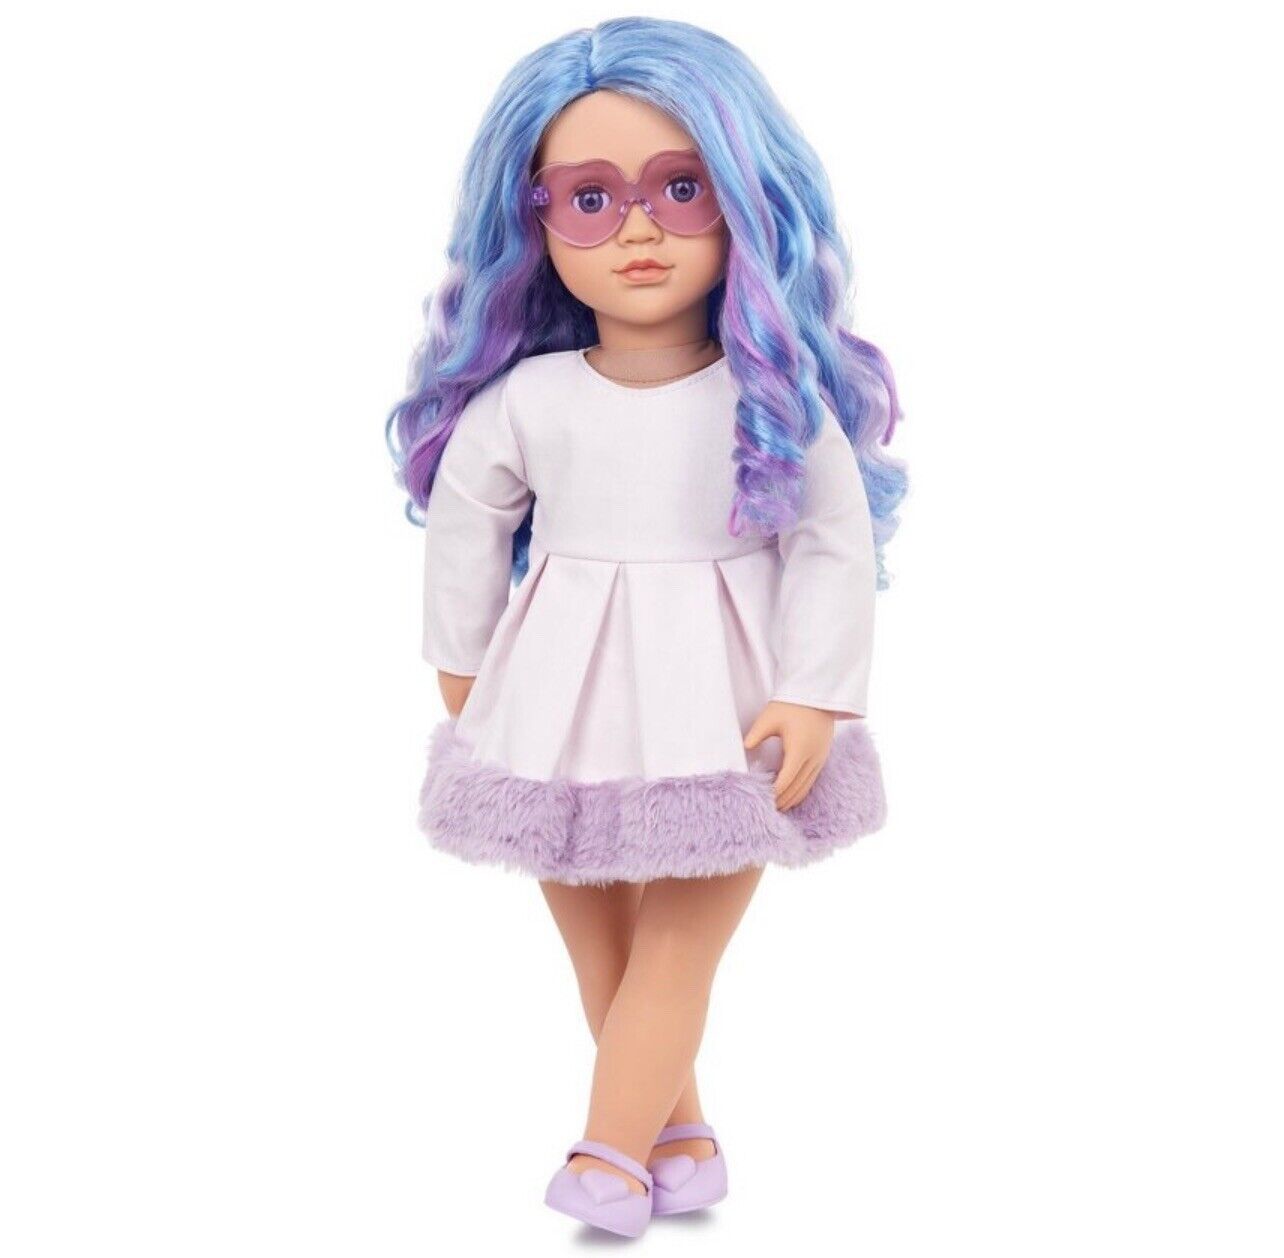 Our Generation Veronika 18" Fashion Doll with Blue and Purple Hair NEW